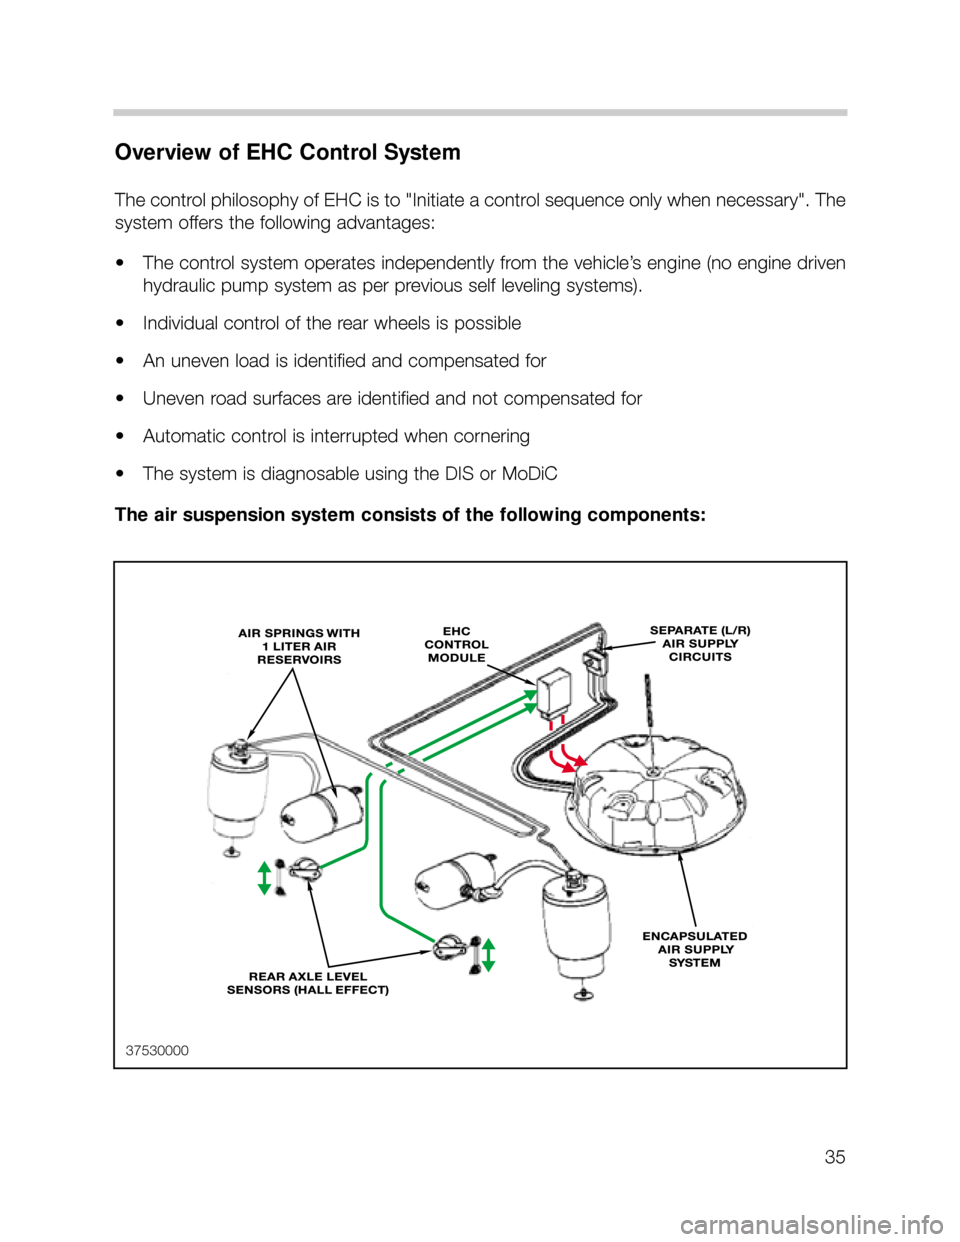 BMW X5 2000 E53 Owners Guide 35
Overview of EHC Control System
The control philosophy of EHC is to "Initiate a control sequence only when necessary". The
system offers the following advantages:
• The control system operates ind